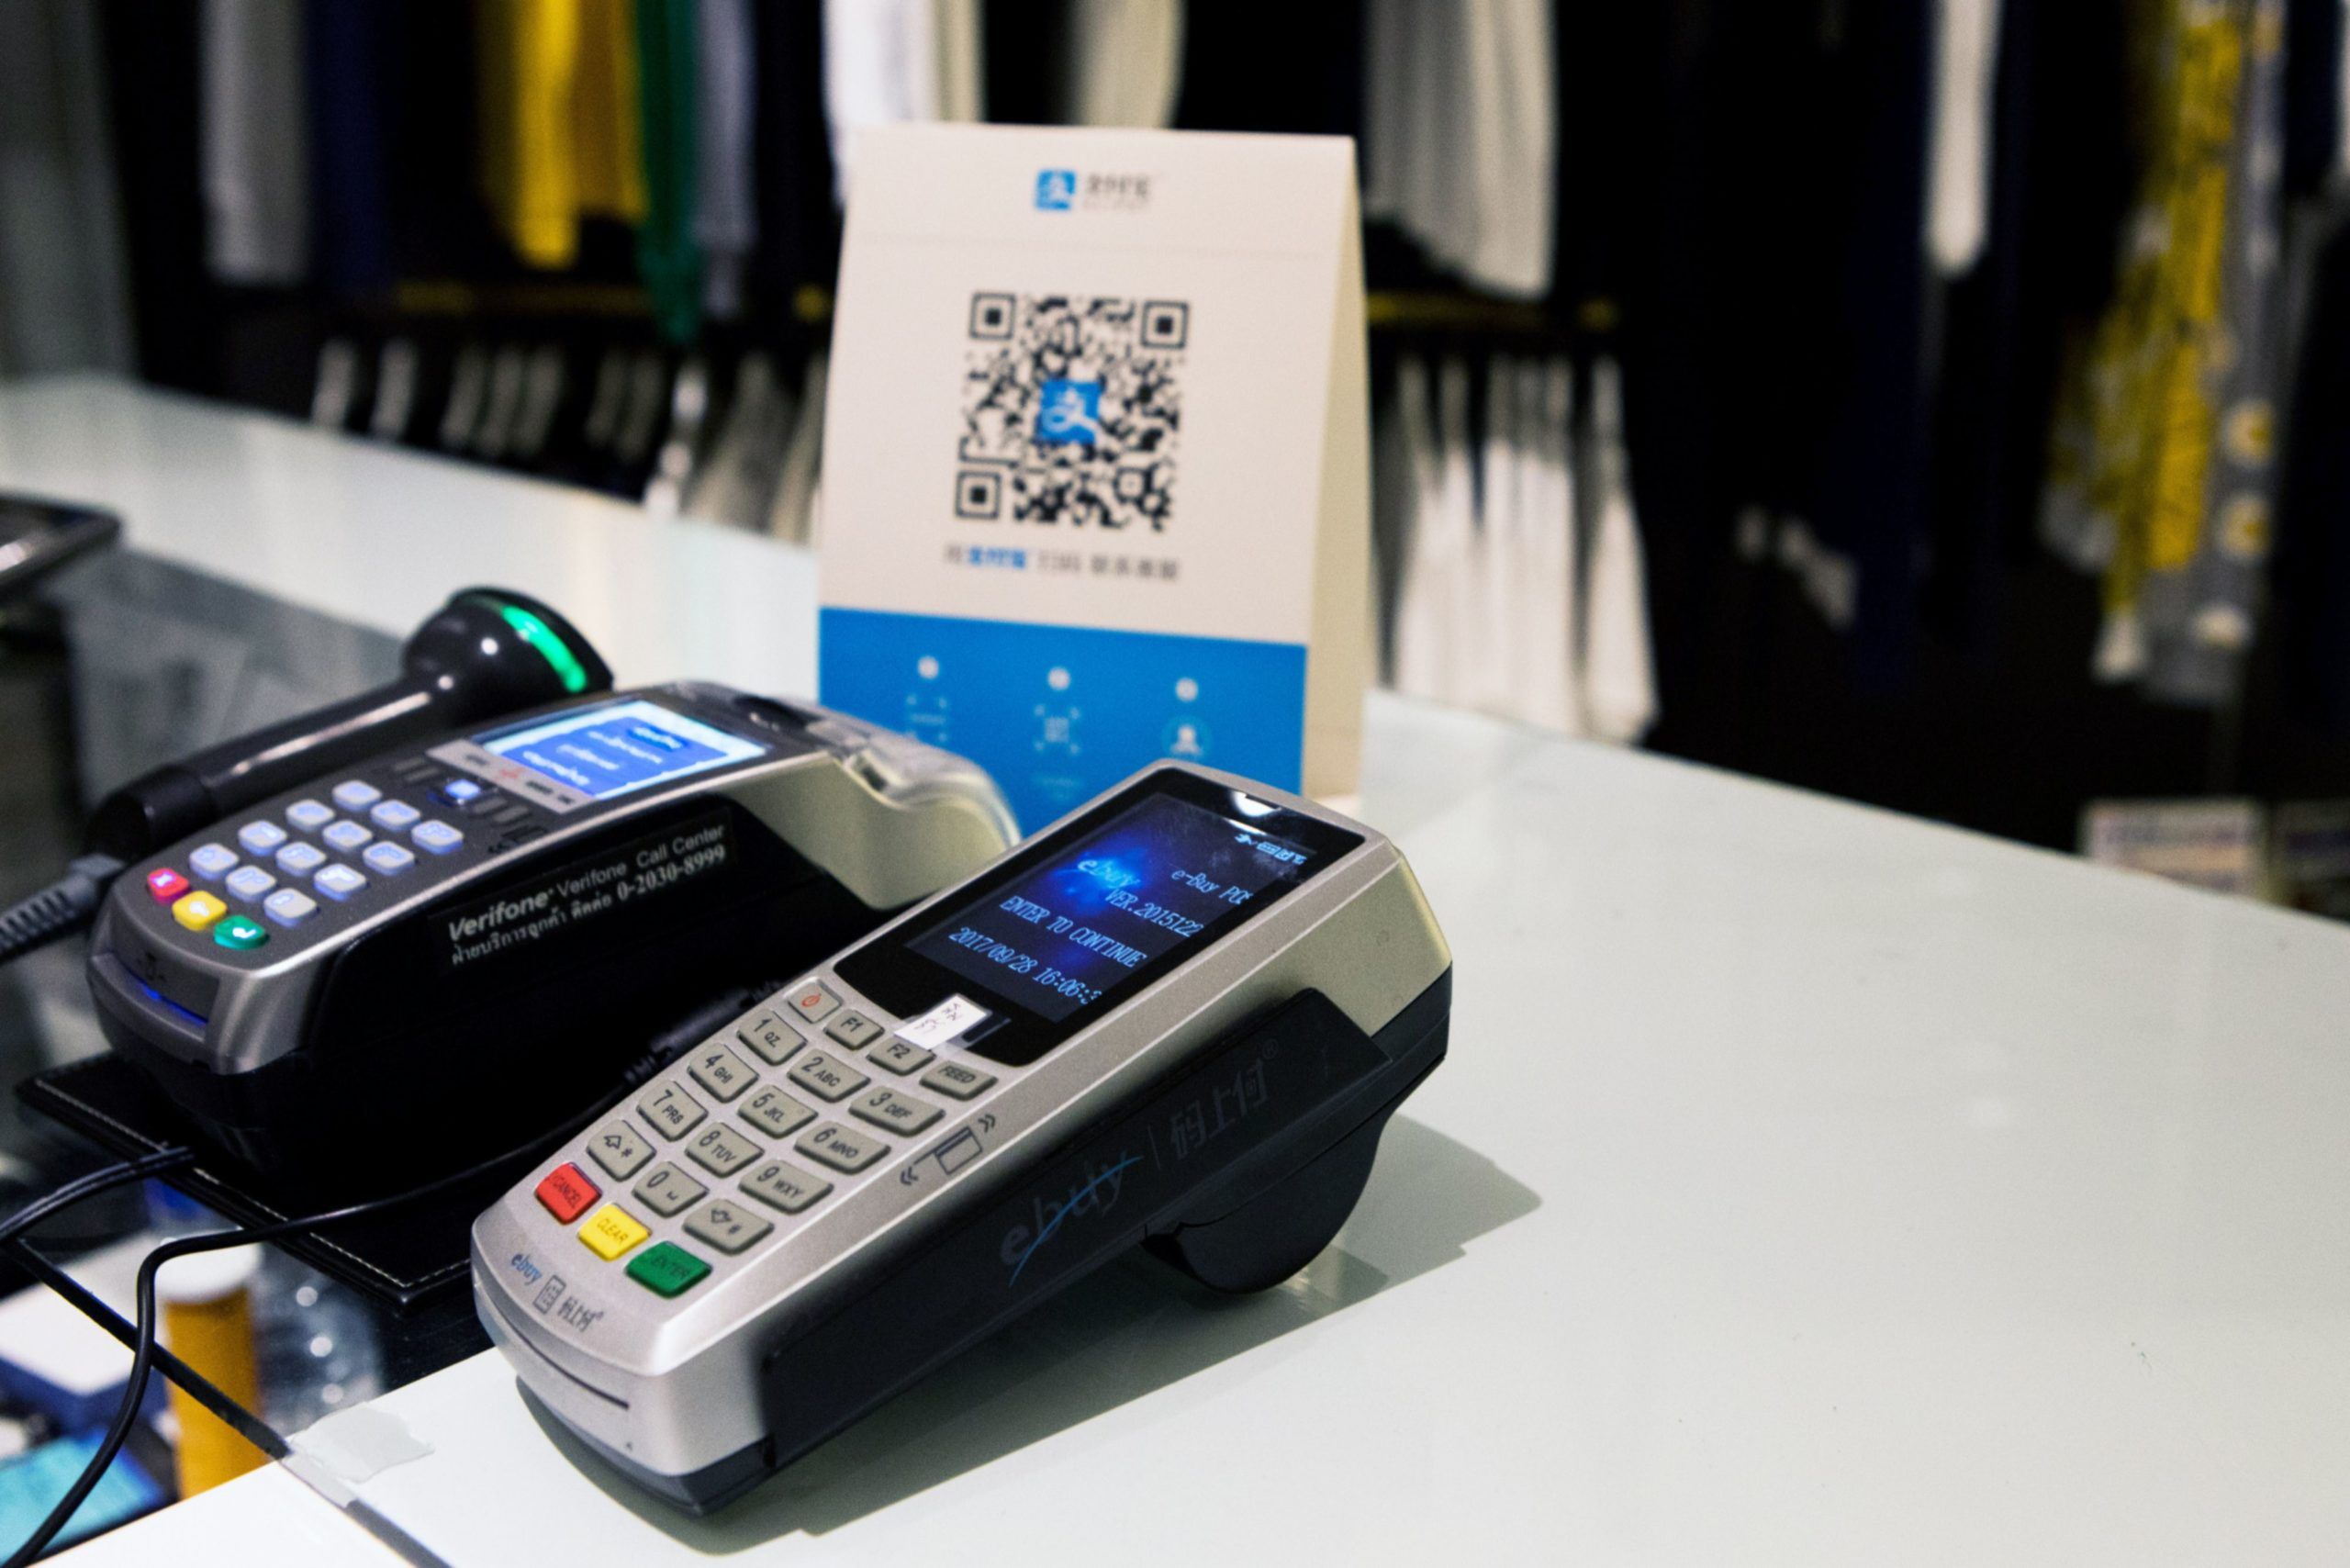 Credit Card readers sit next to a sign for Ant Financial Services Group's Alipay, an affiliate of Alibaba Group Holding Ltd., at the check out counter of a store 